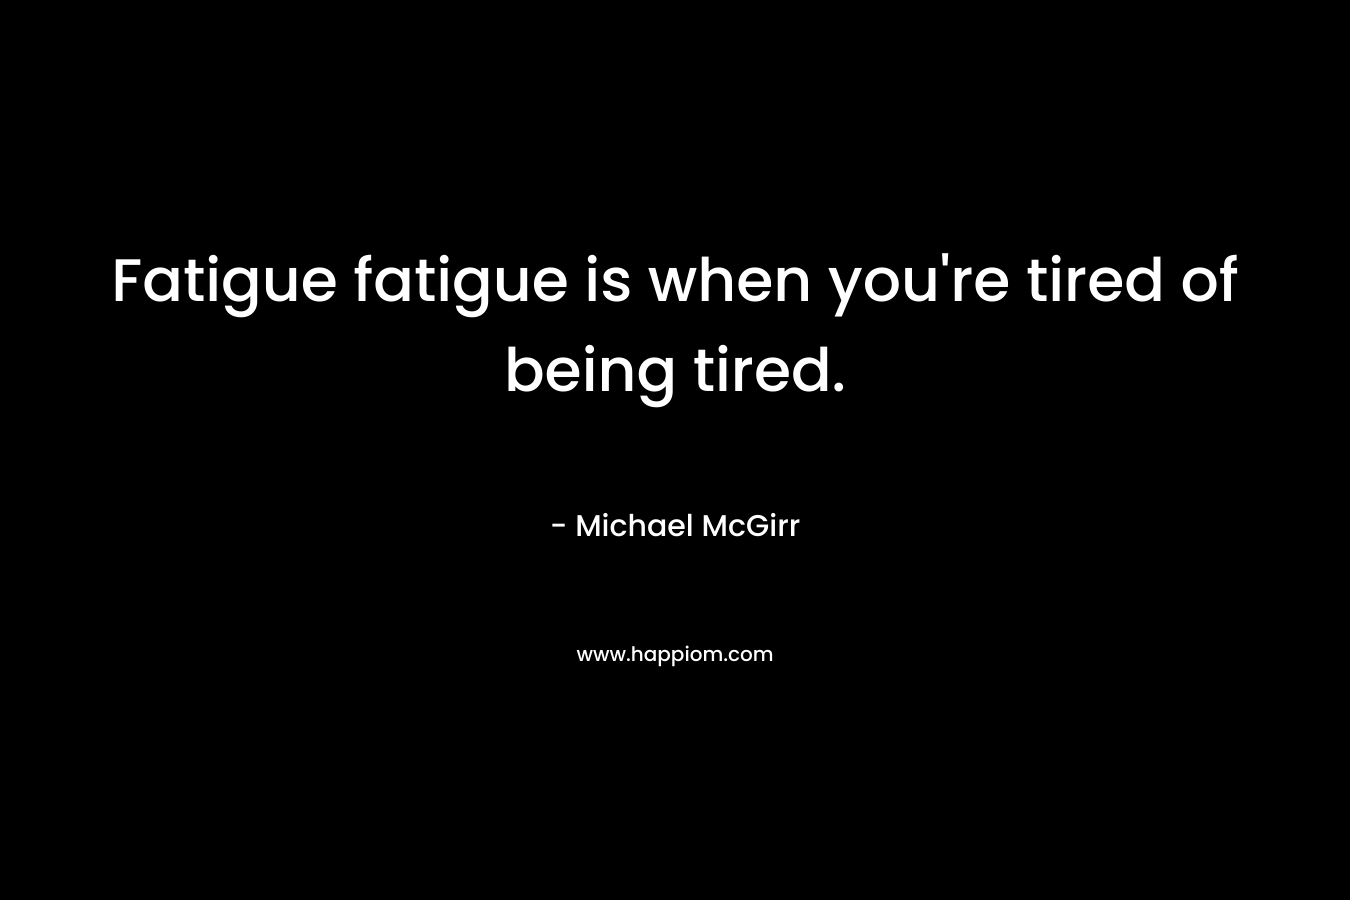 Fatigue fatigue is when you’re tired of being tired. – Michael McGirr